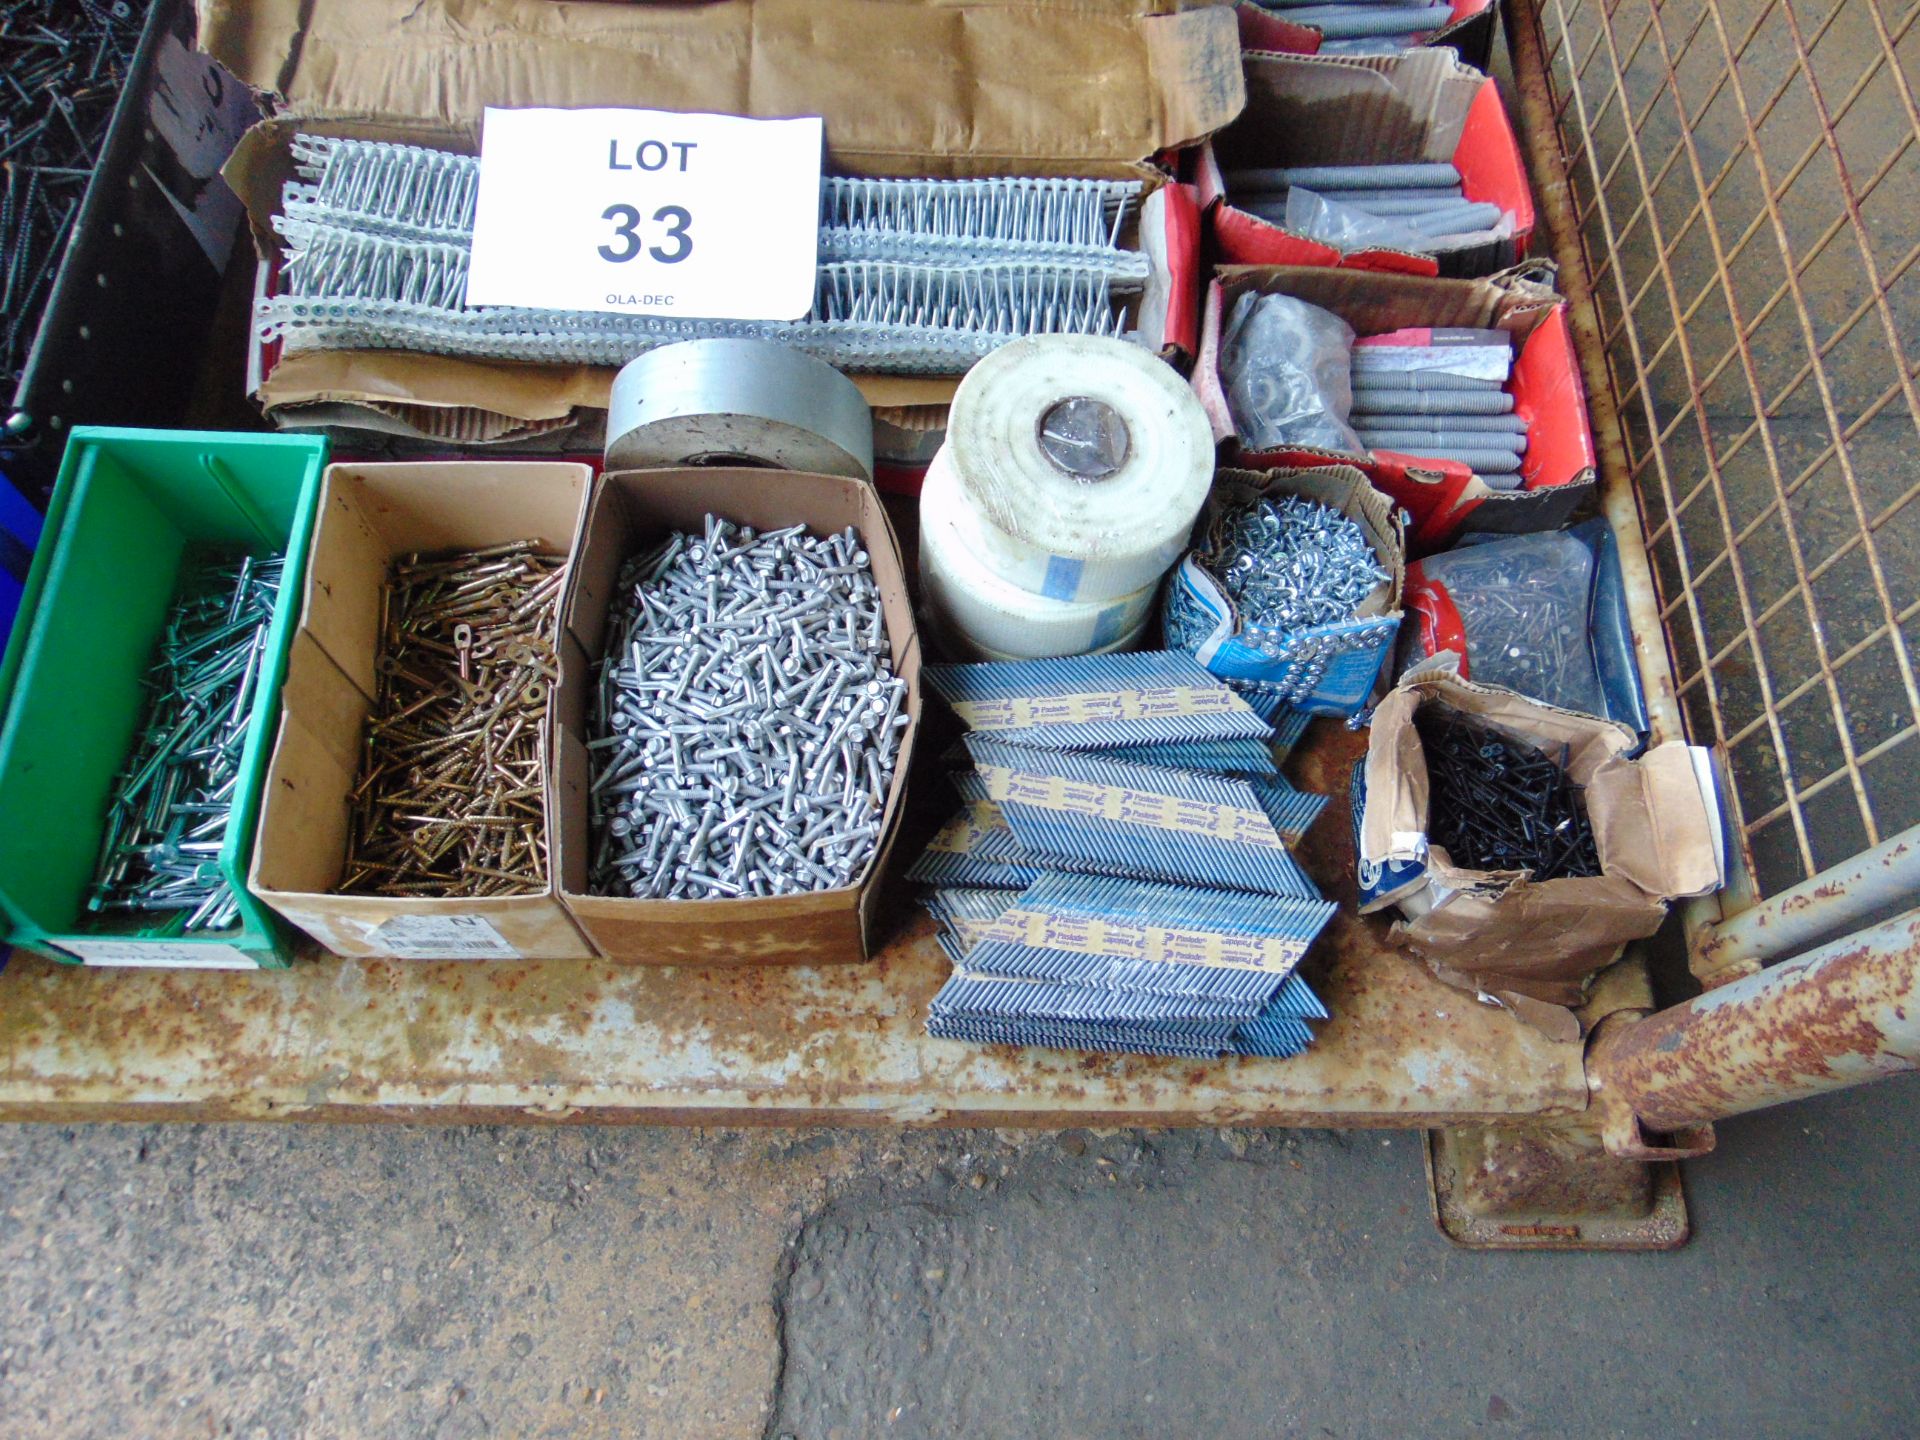 1 Stillage of Fixings inc nails, nuts bolts, tape, etc